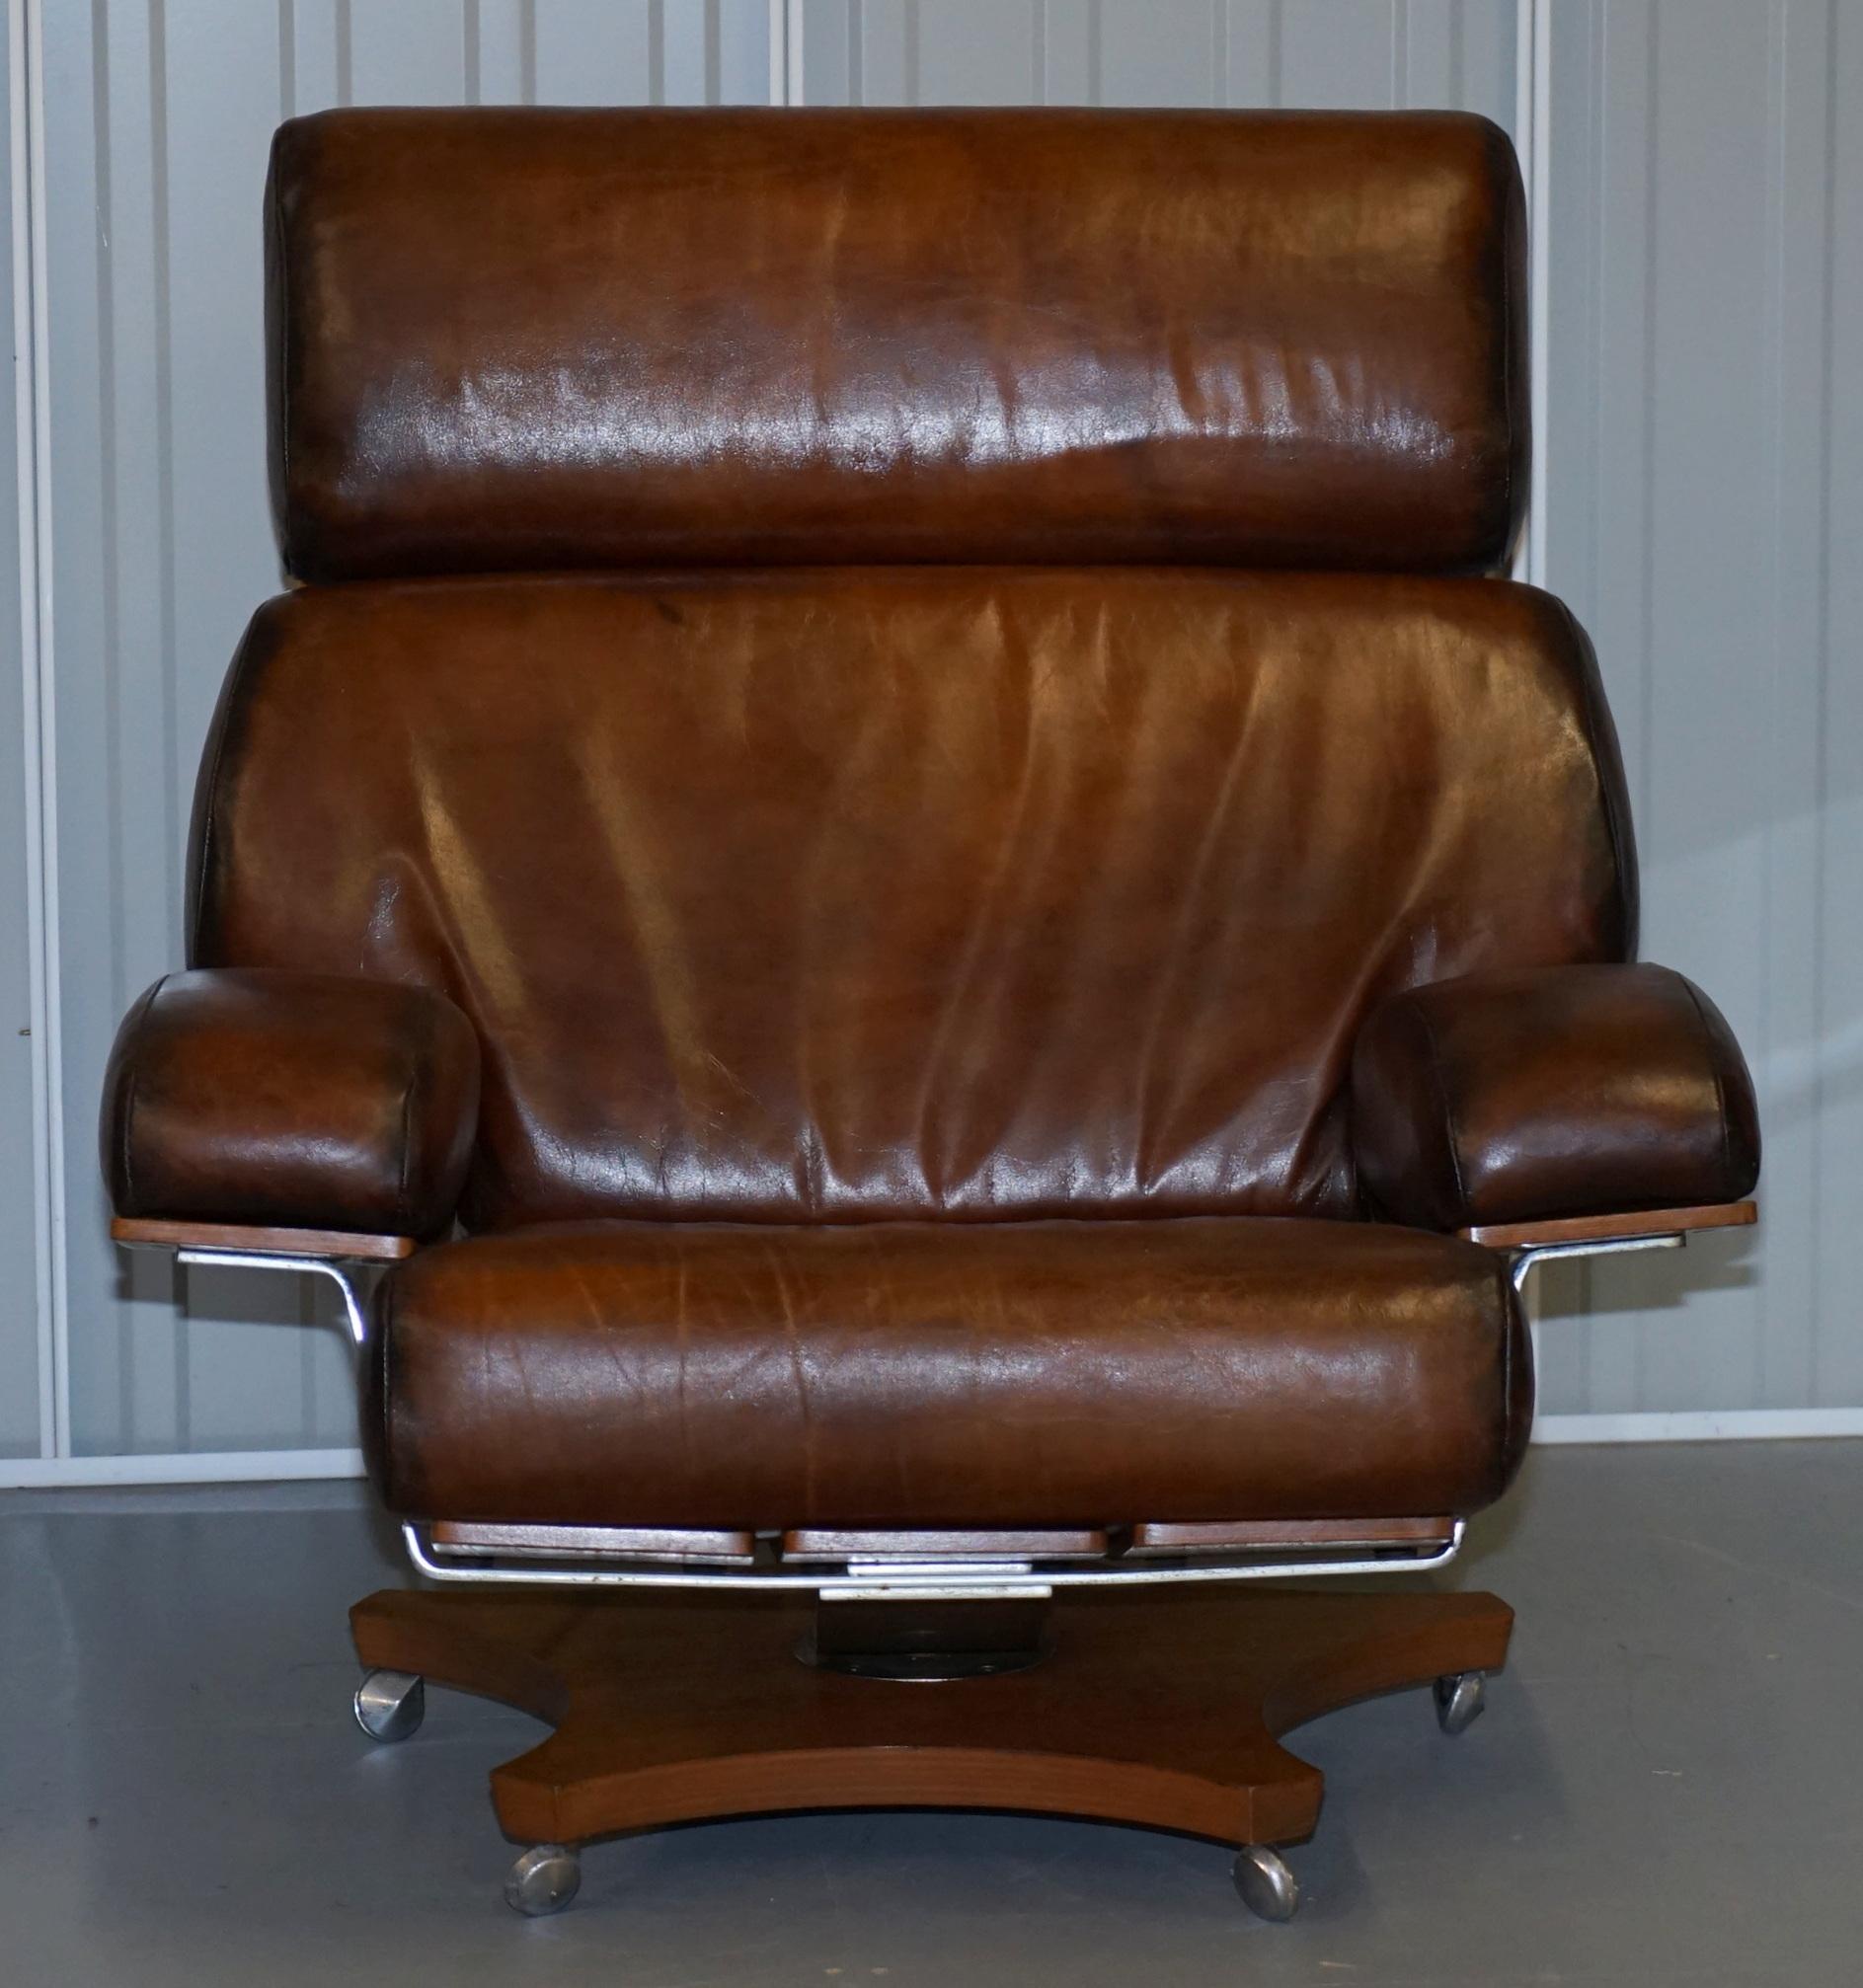 We are delighted to offer for sale this stunning one of a kind fully restored G Plan Housemaster swivel armchair

Simply put this is the absolute finest example of this chair anywhere in the world today!

This chair offers unparalleled comfort,